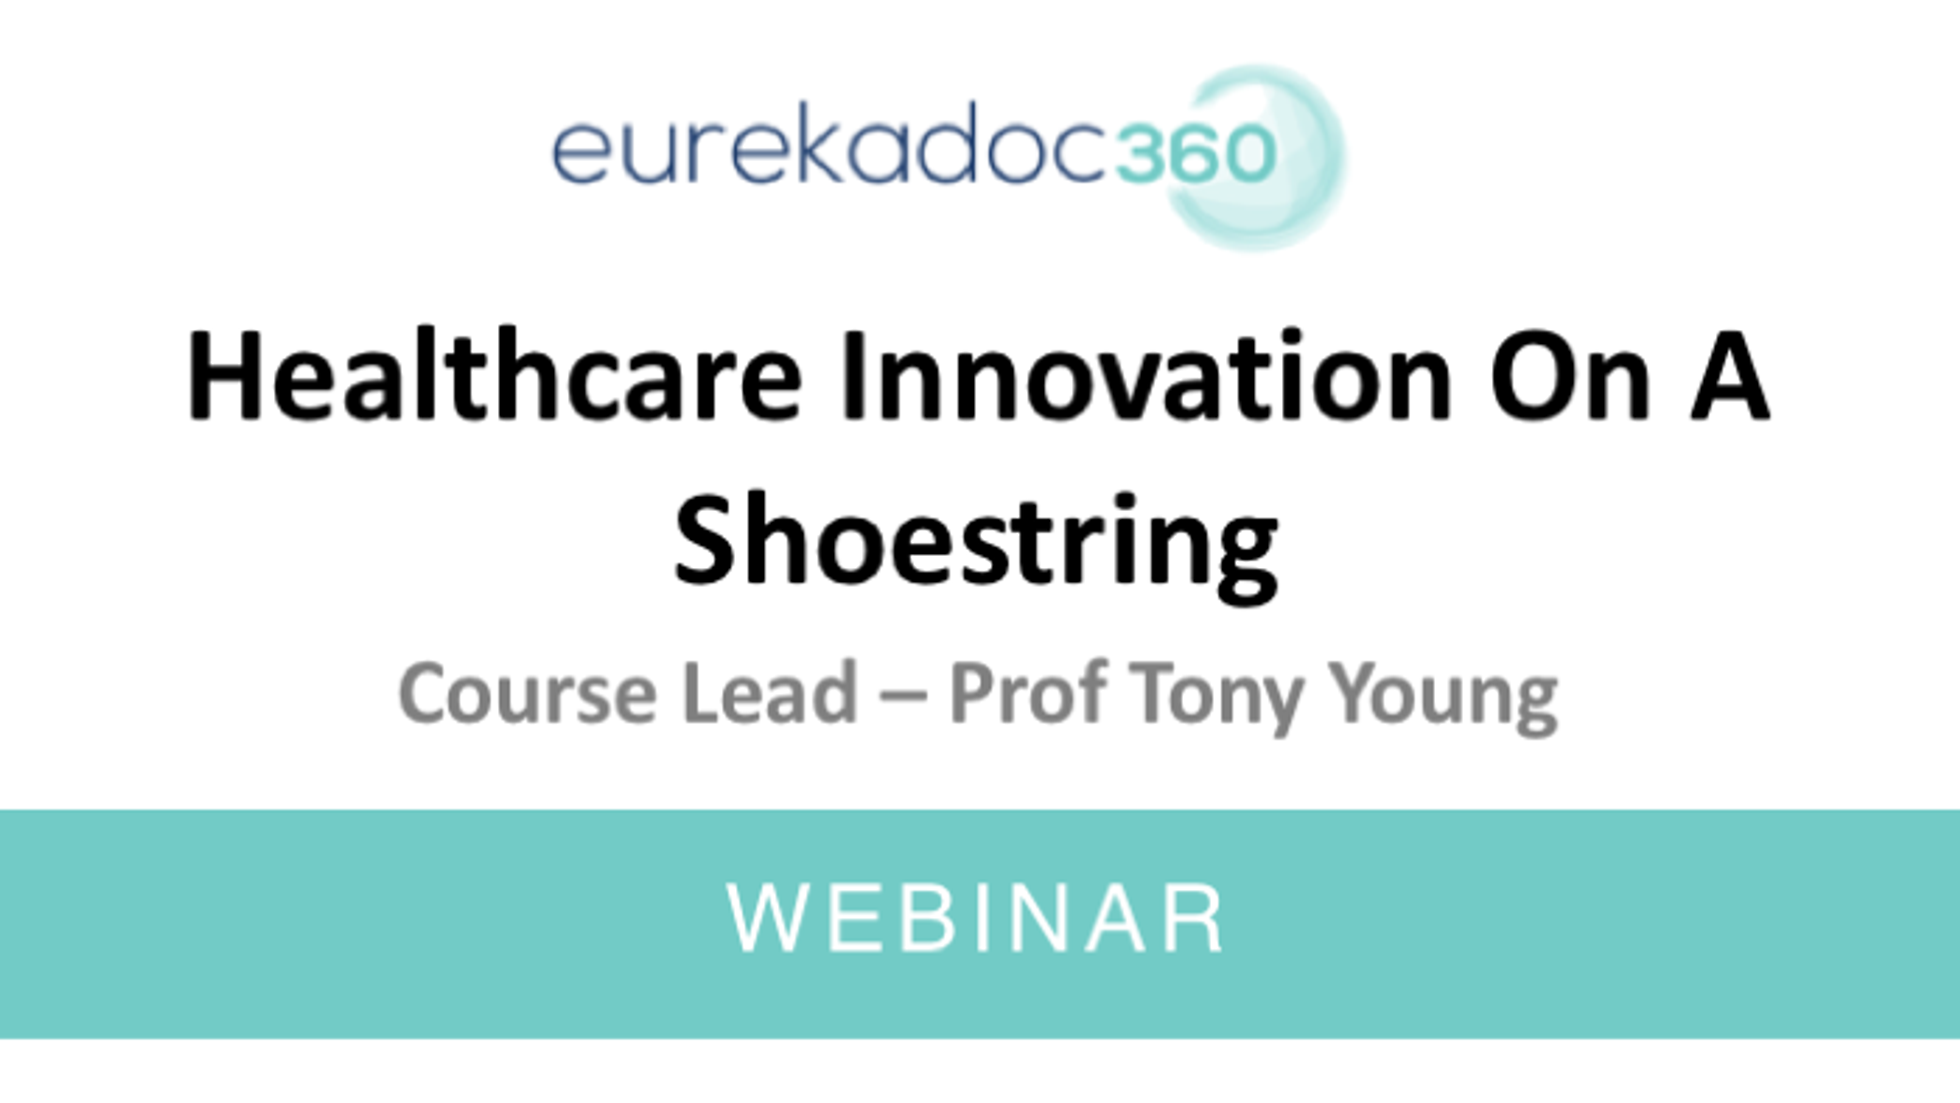 Healthcare Innovation on a Shoestring